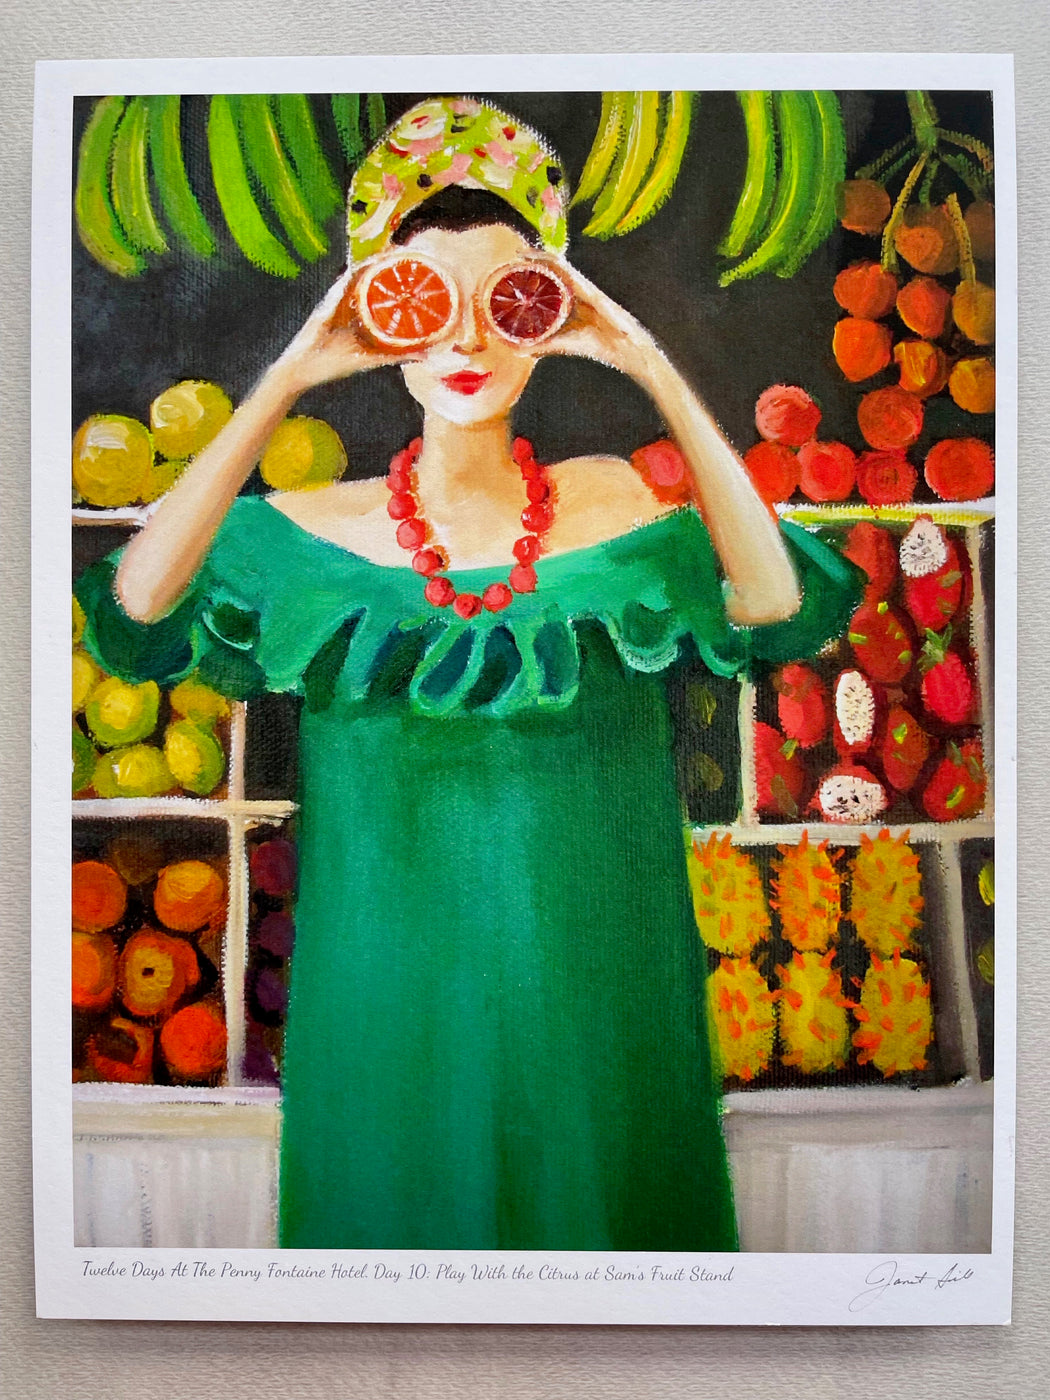 "Play With Citrus at Sam's Fruit Stand" by Janet Hill